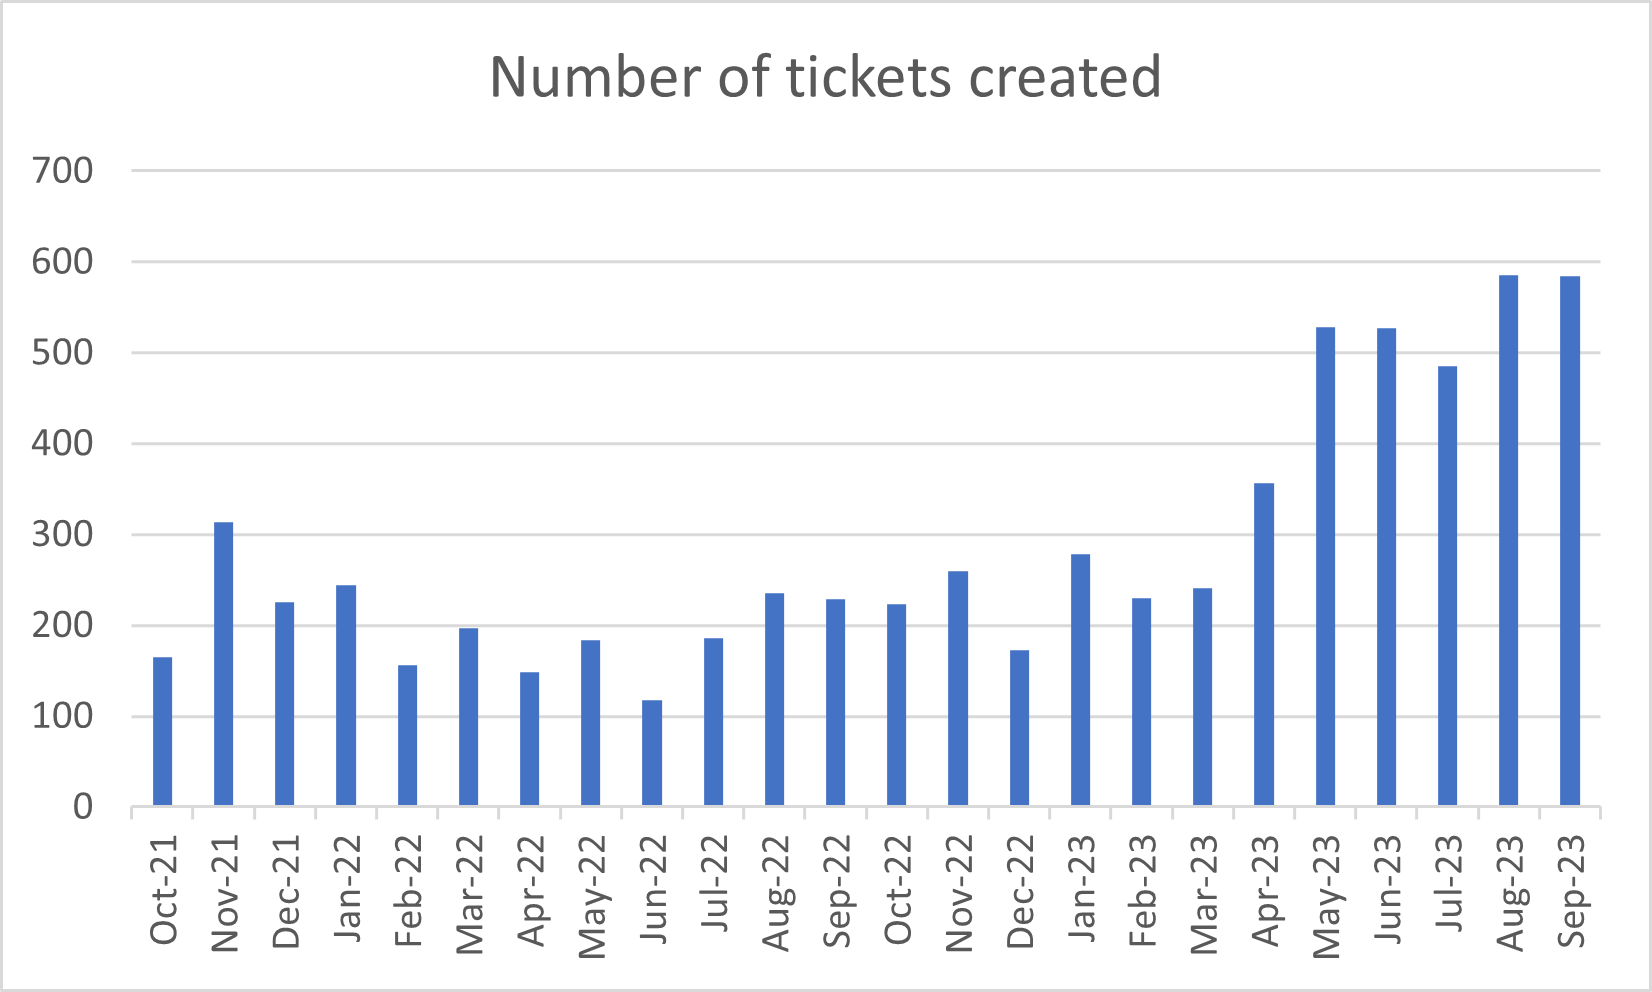 No of tickets created